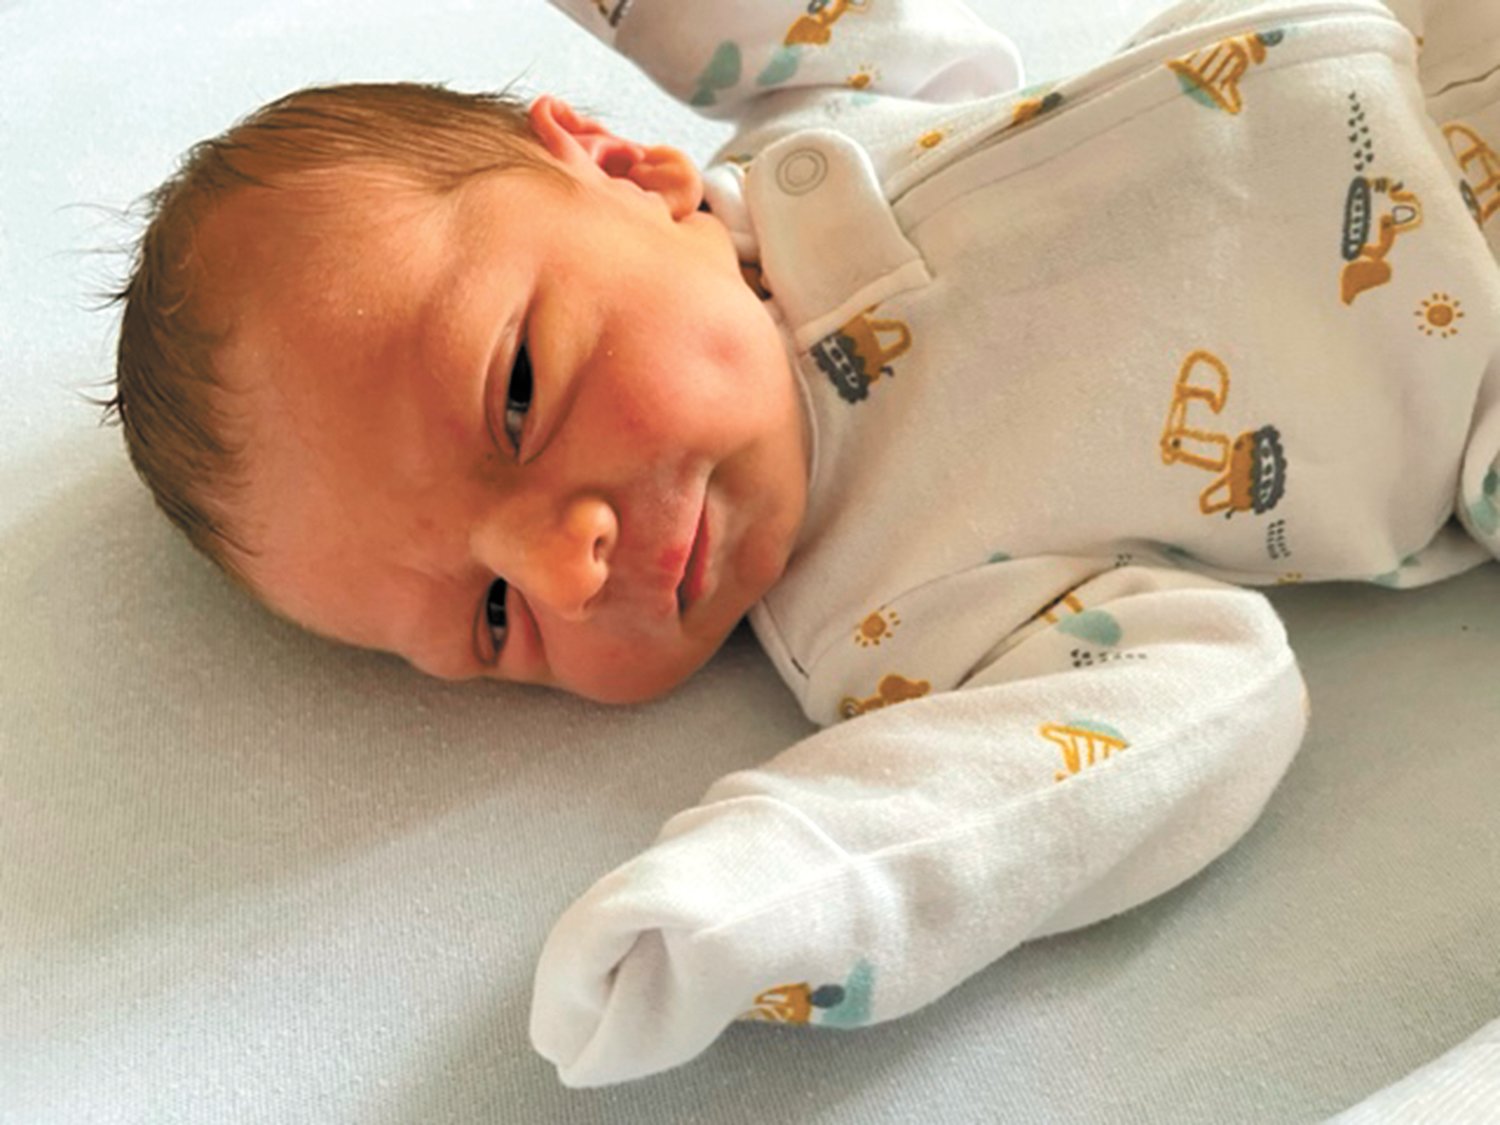 NEW ARRIVAL: Wesley Scott Sponseller was born June 14, weighed 6 pounds, 15 ounces and measured 19 inches long.